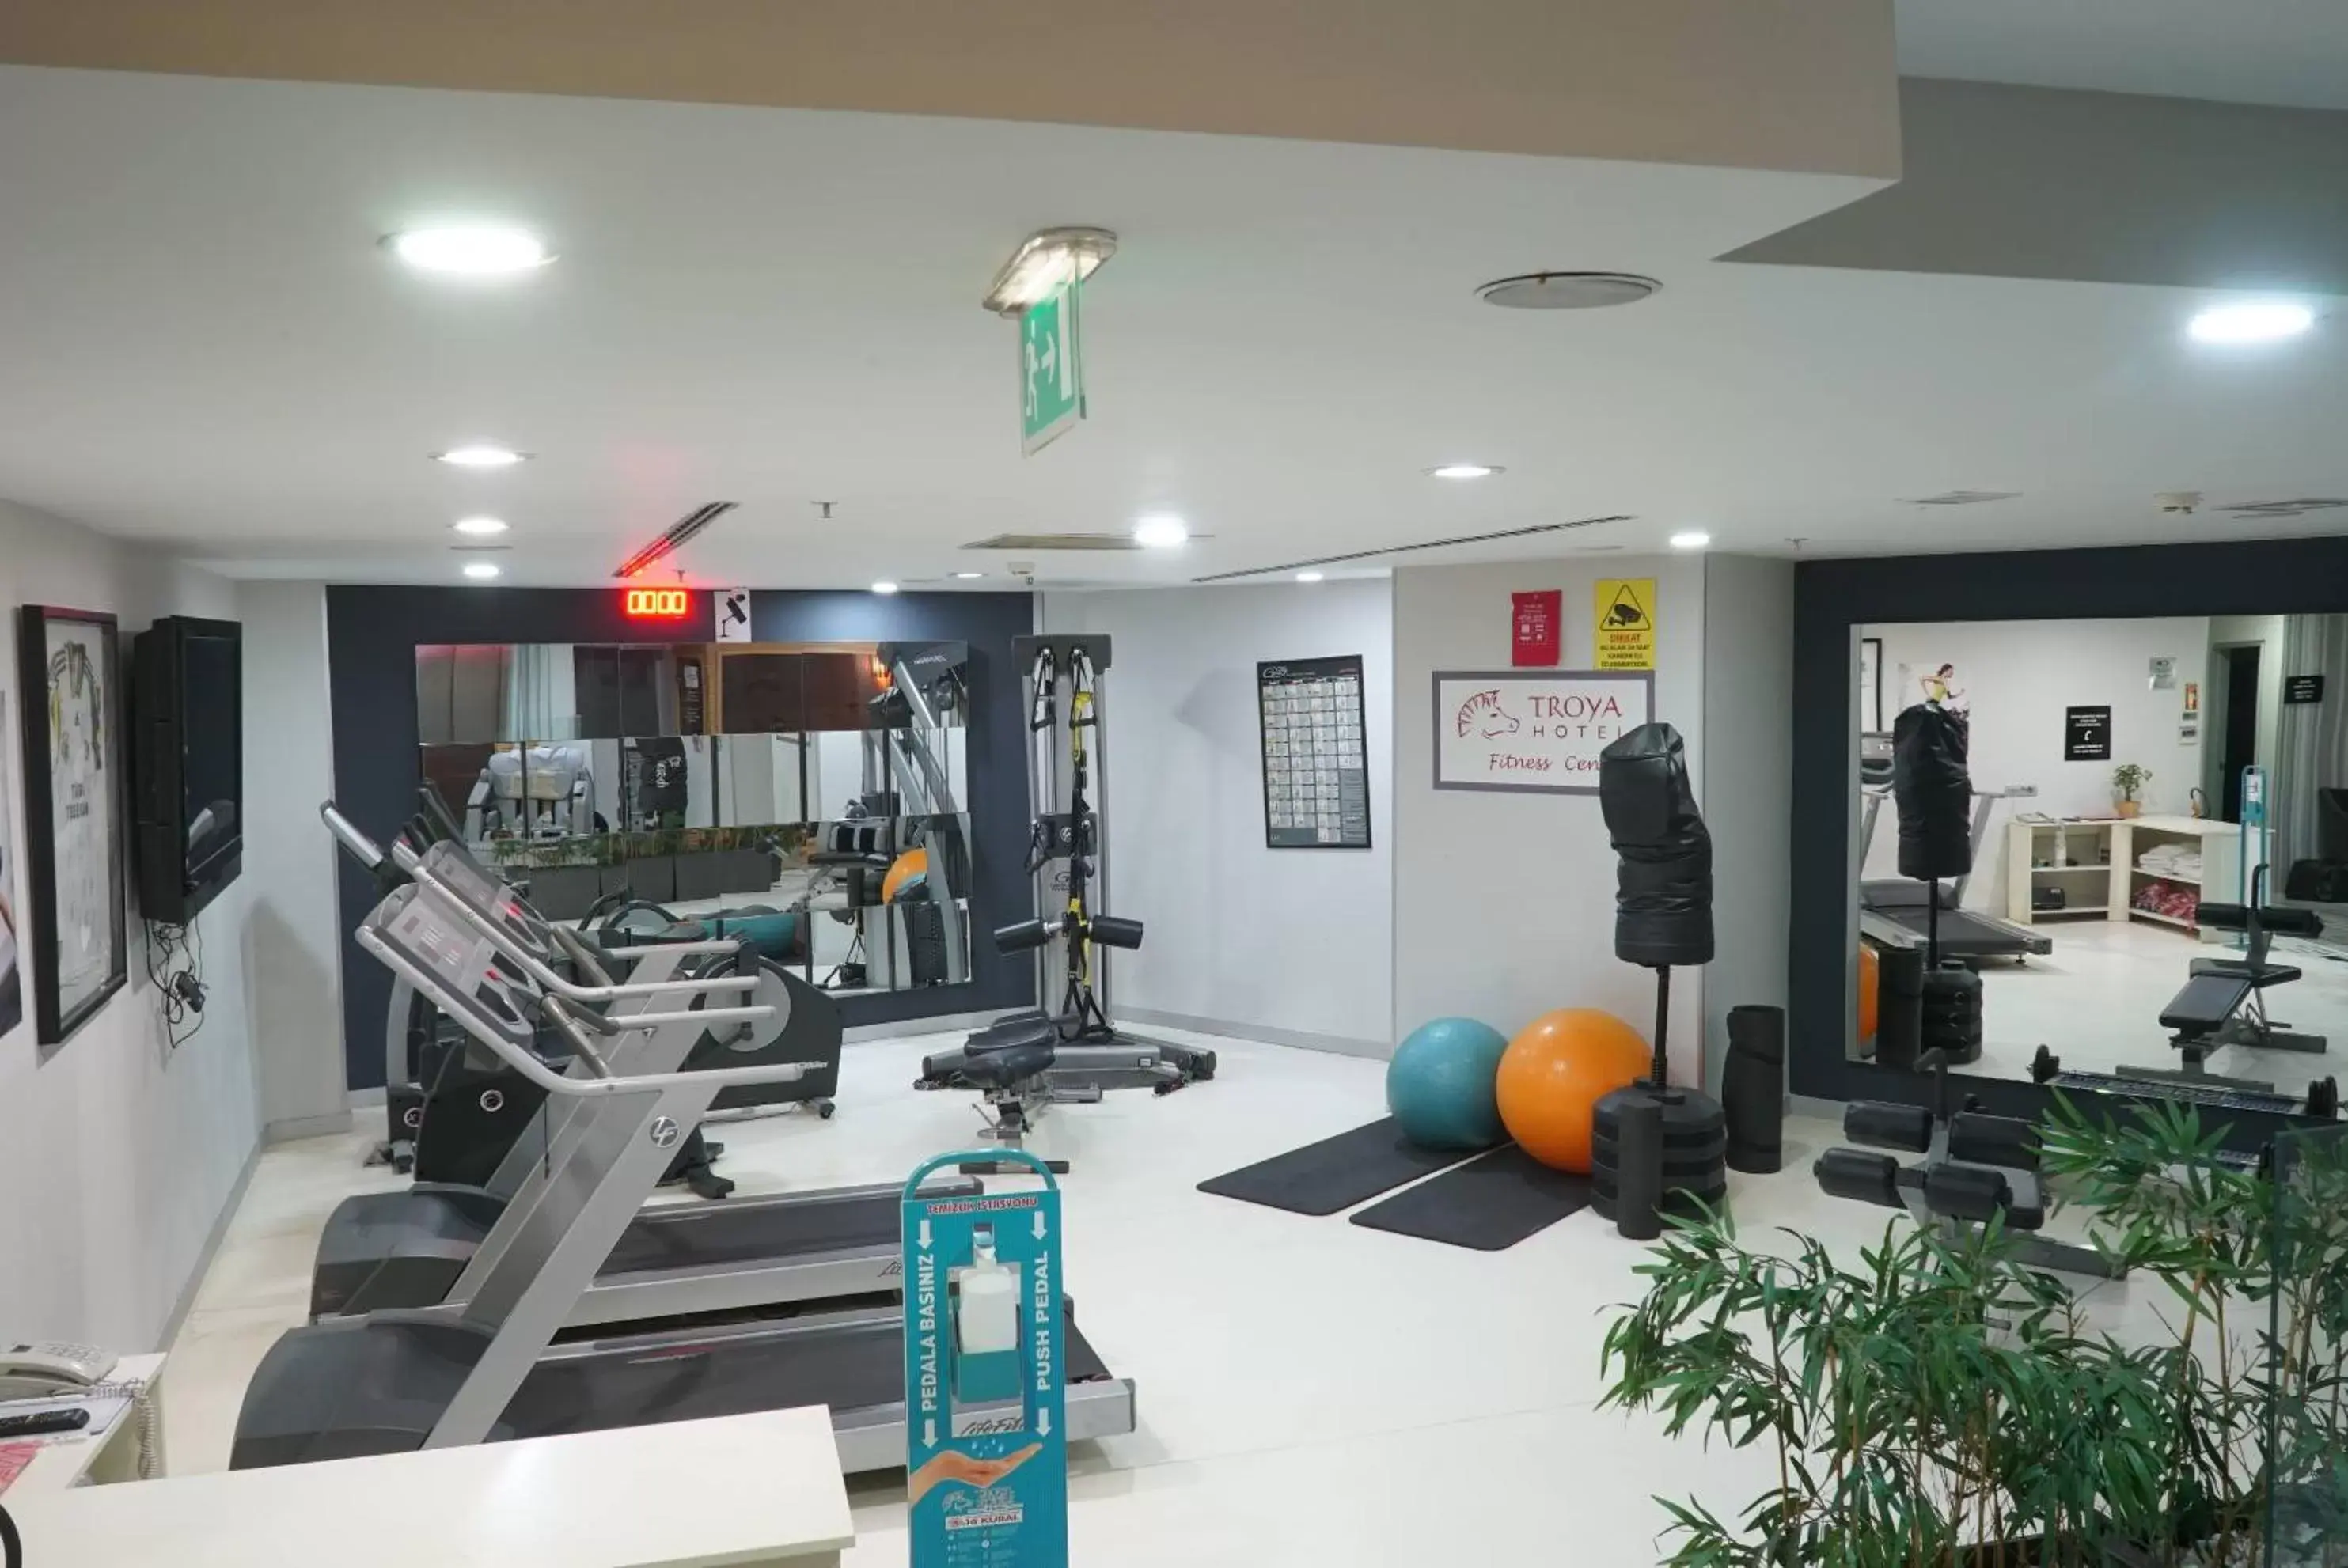 Fitness centre/facilities, Fitness Center/Facilities in Hotel Troya